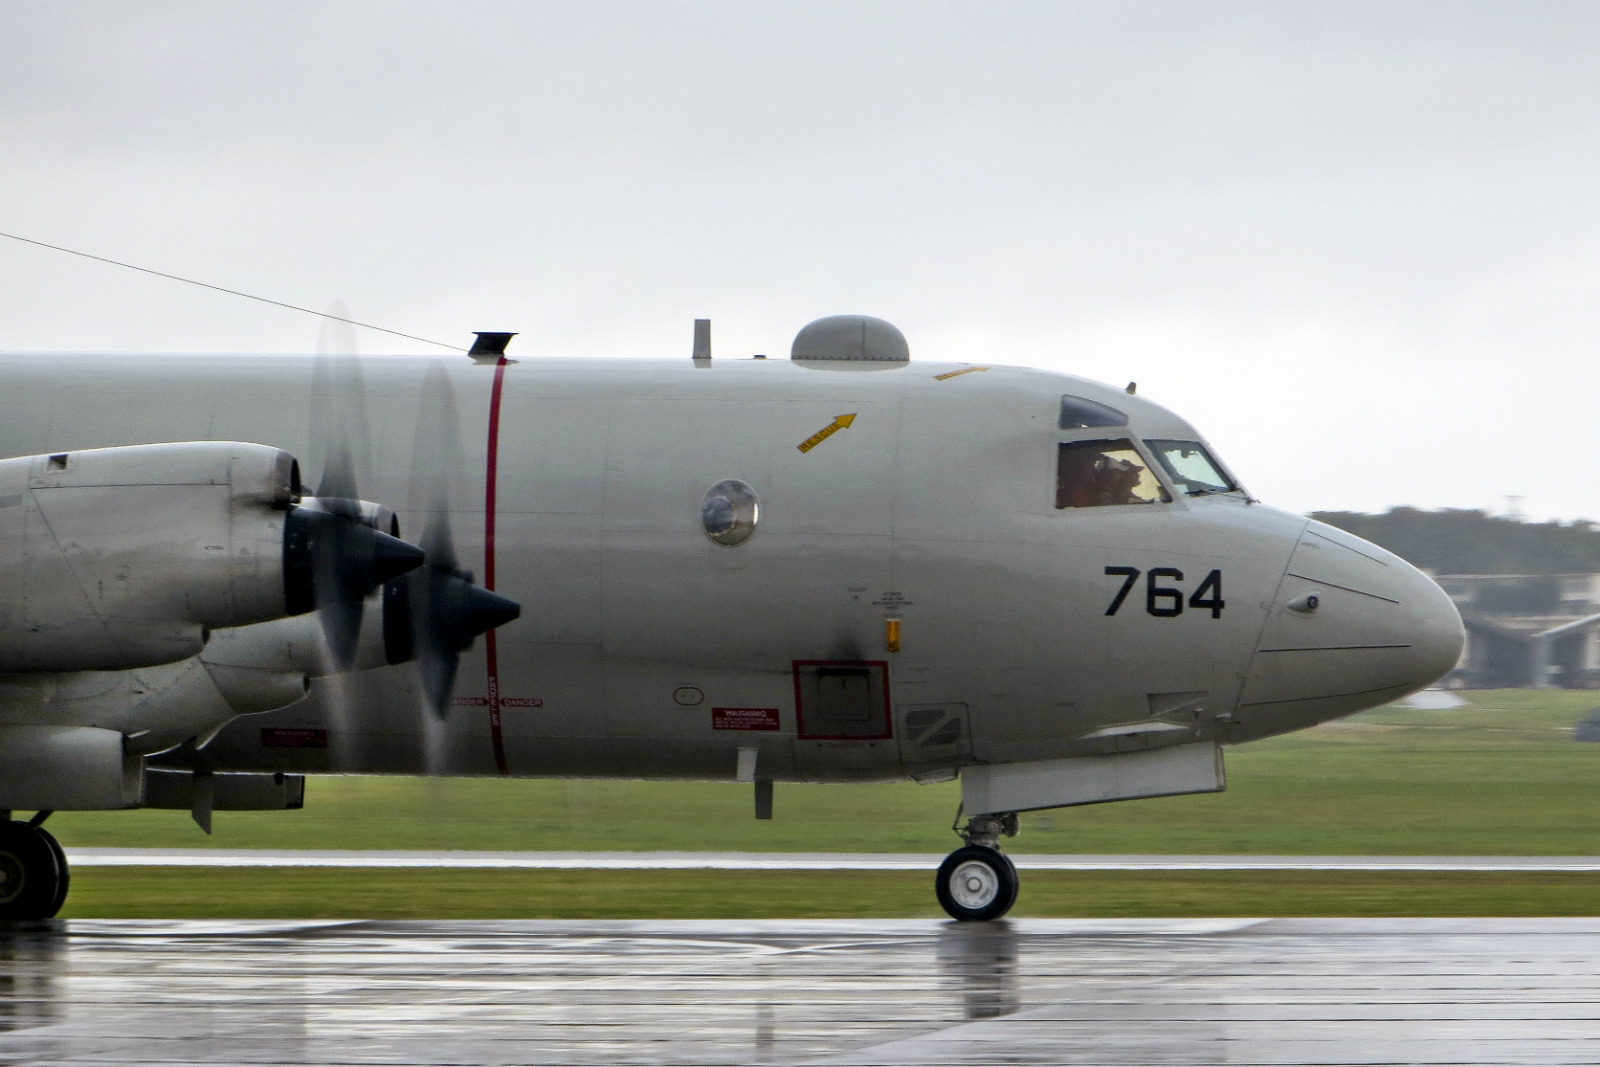 Monster Machines: How The Granddaddy Of US Recon Planes Is Helping Search For Flight 370